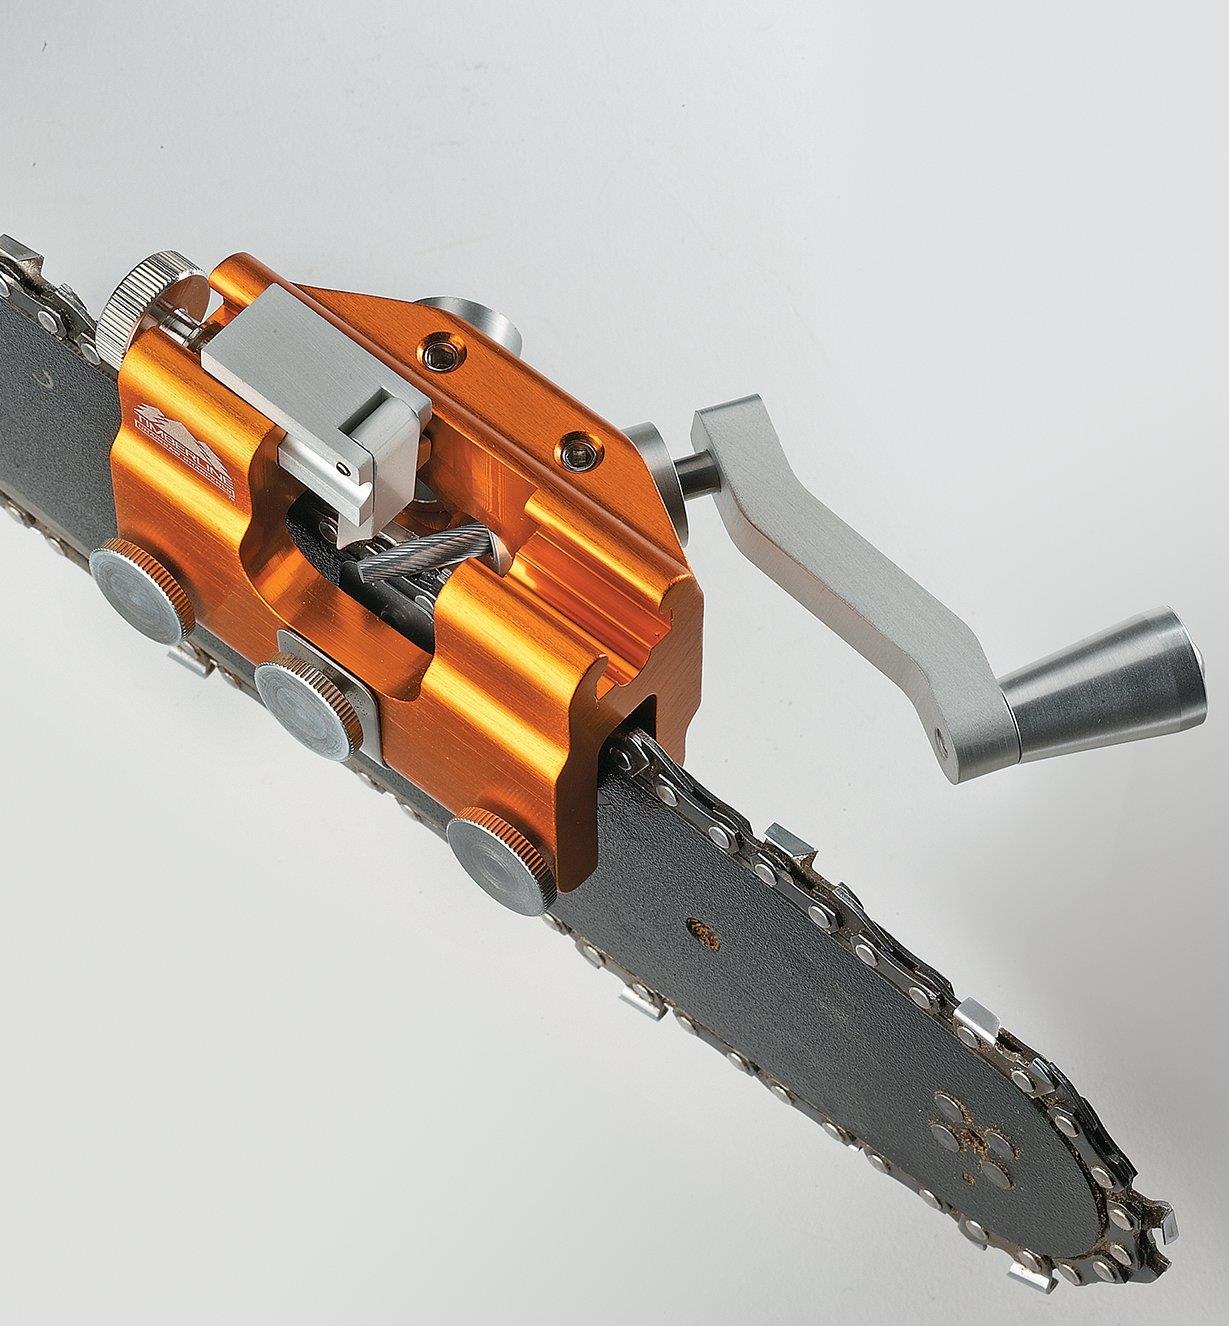 Chainsaw Chain Sharpener jig Hand-Crank Chain-Saw Sharpener Chainsaw jig Sharpening for All Kinds of Chain Saws and Electric Saws.